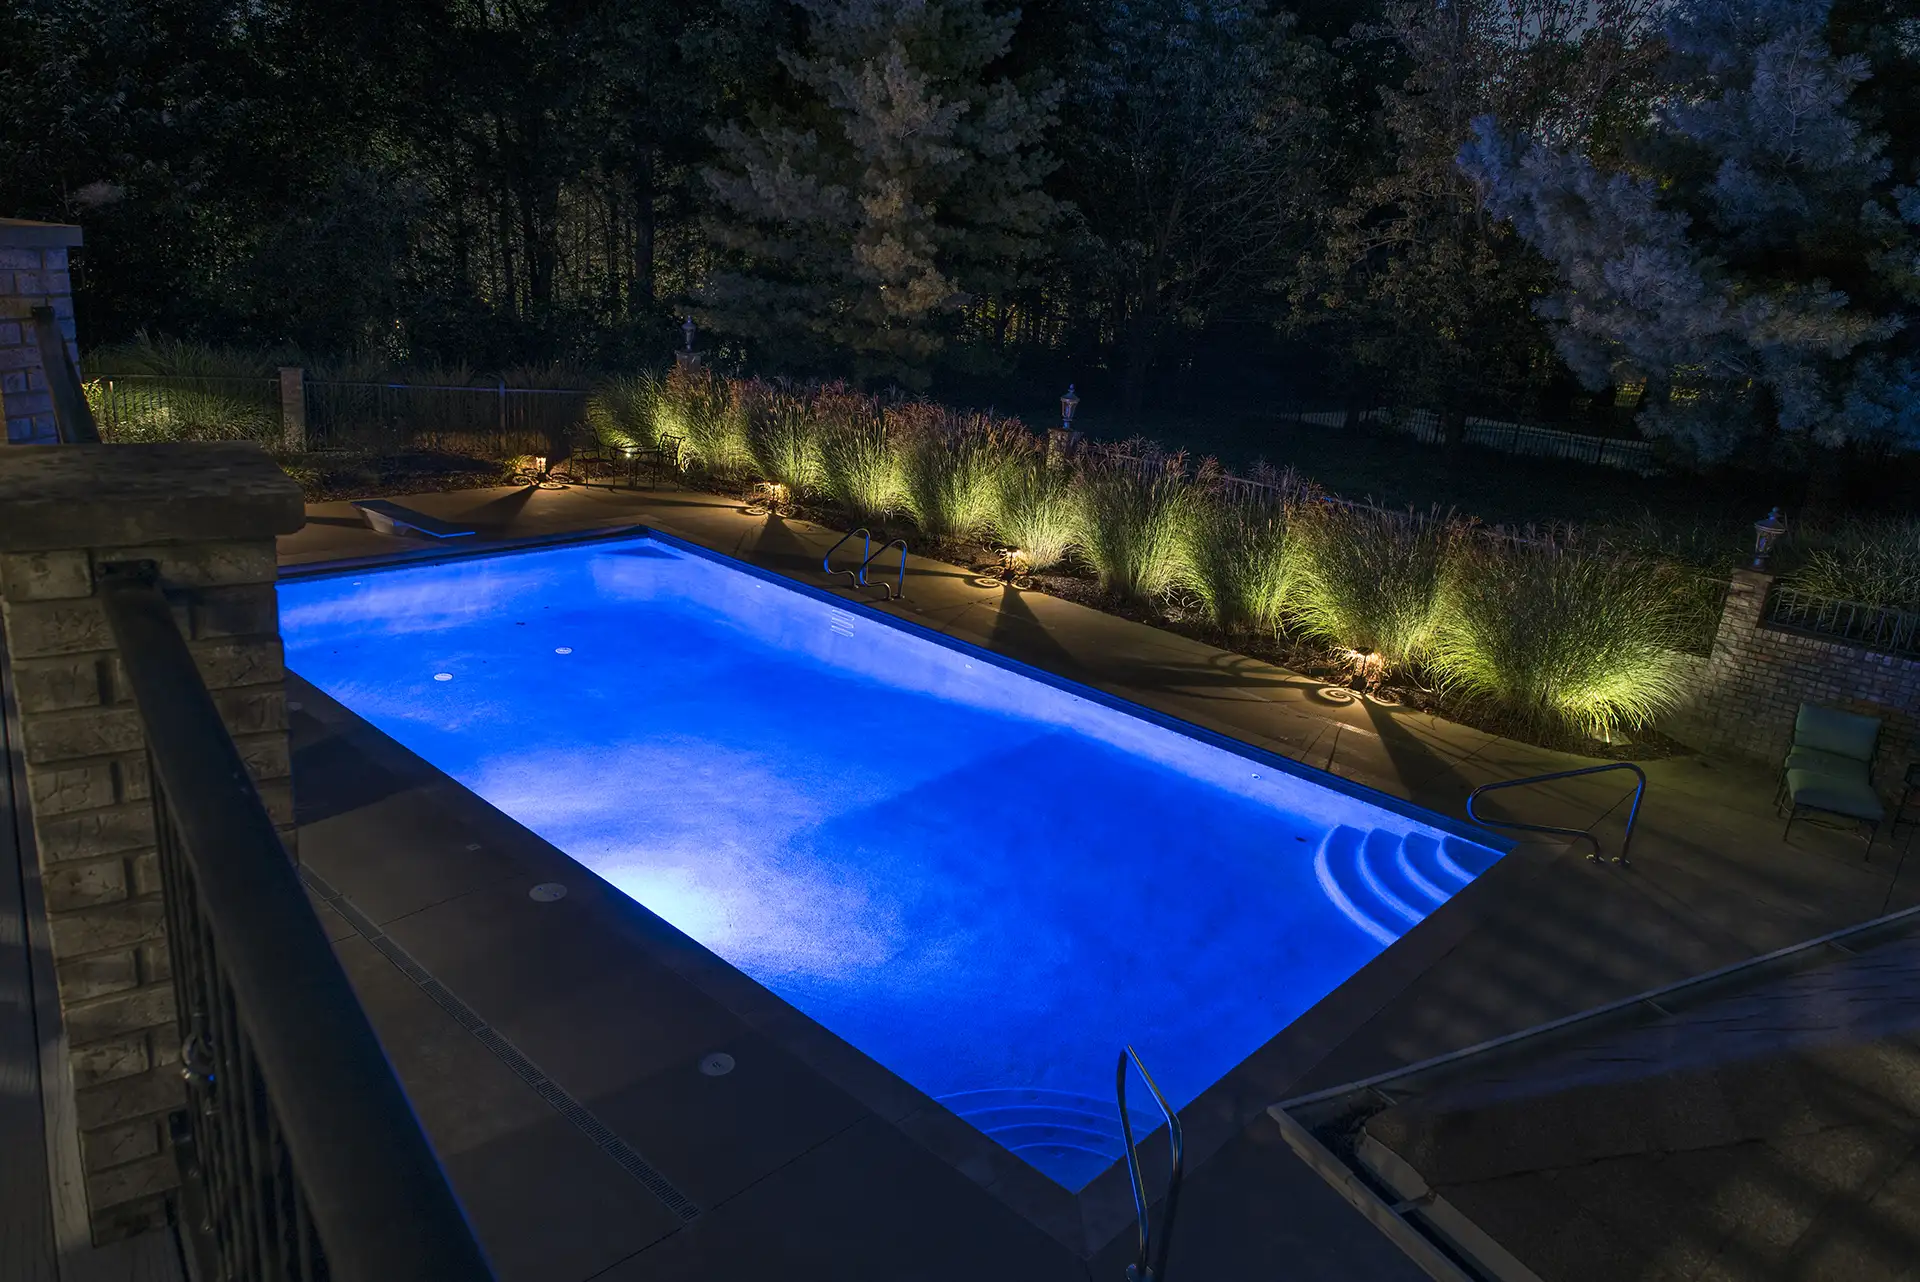 Schneider residence image 4 pool seating area lighting Lighthouse Outdoor Lighting and Audio central Missouri